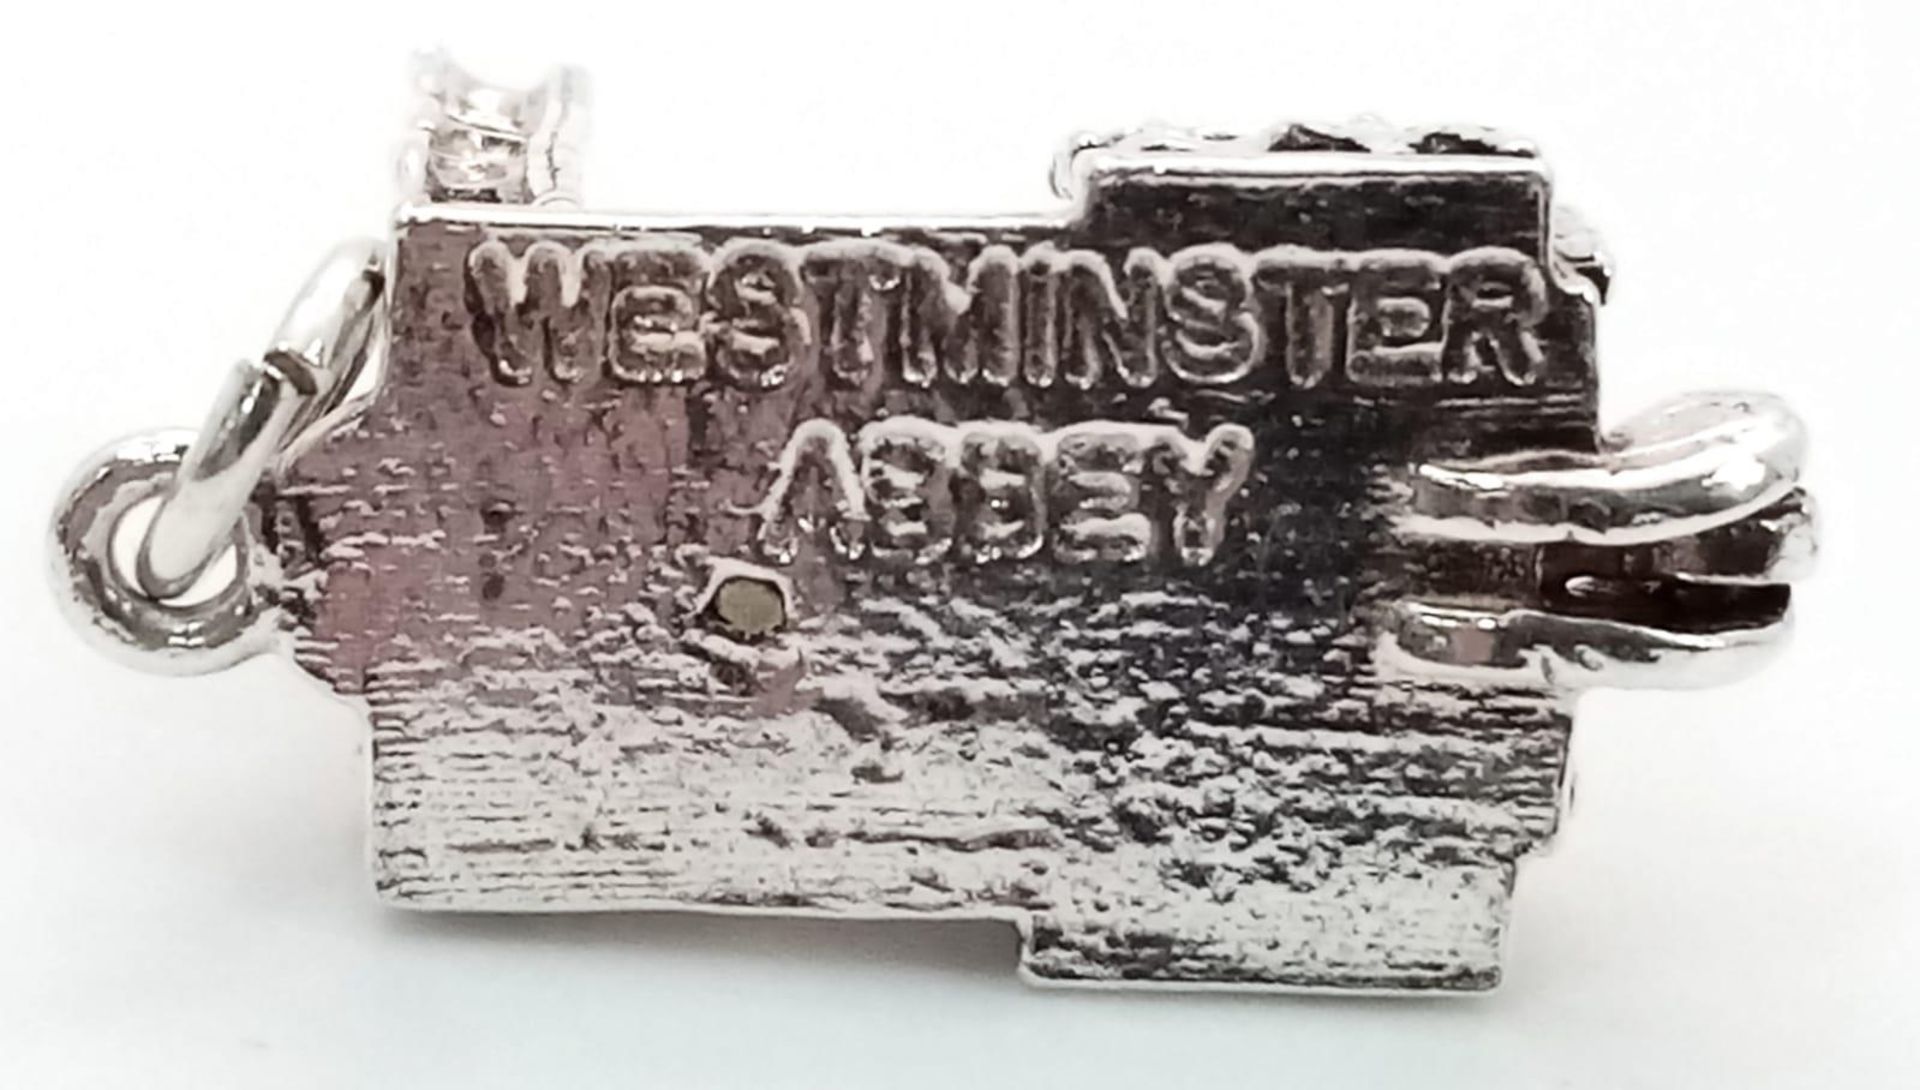 STERLING SILVER WESTMINSTER ABBEY CHARM WHICH OPENS TO REVEAL A BIBLE, WEIGHT 6G - Image 3 of 5